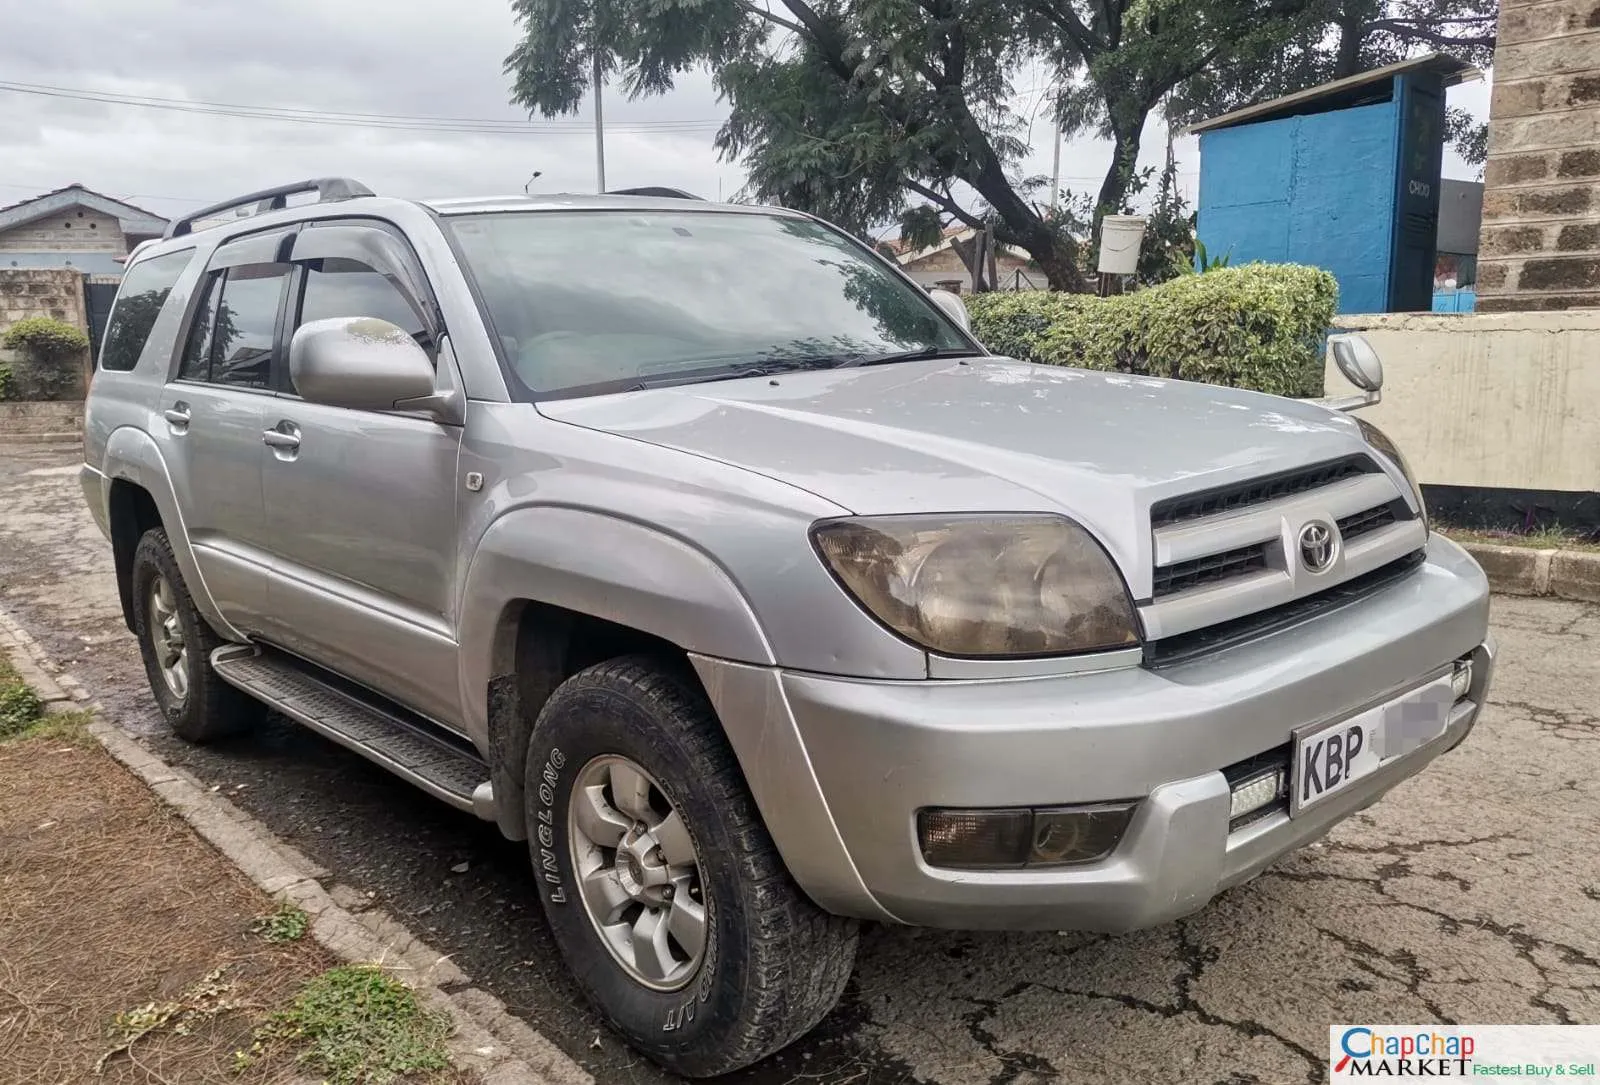 Toyota Hilux Surf for sale in Kenya You Pay 40% Deposit 60% Installments trade in OK EXCLUSIVE